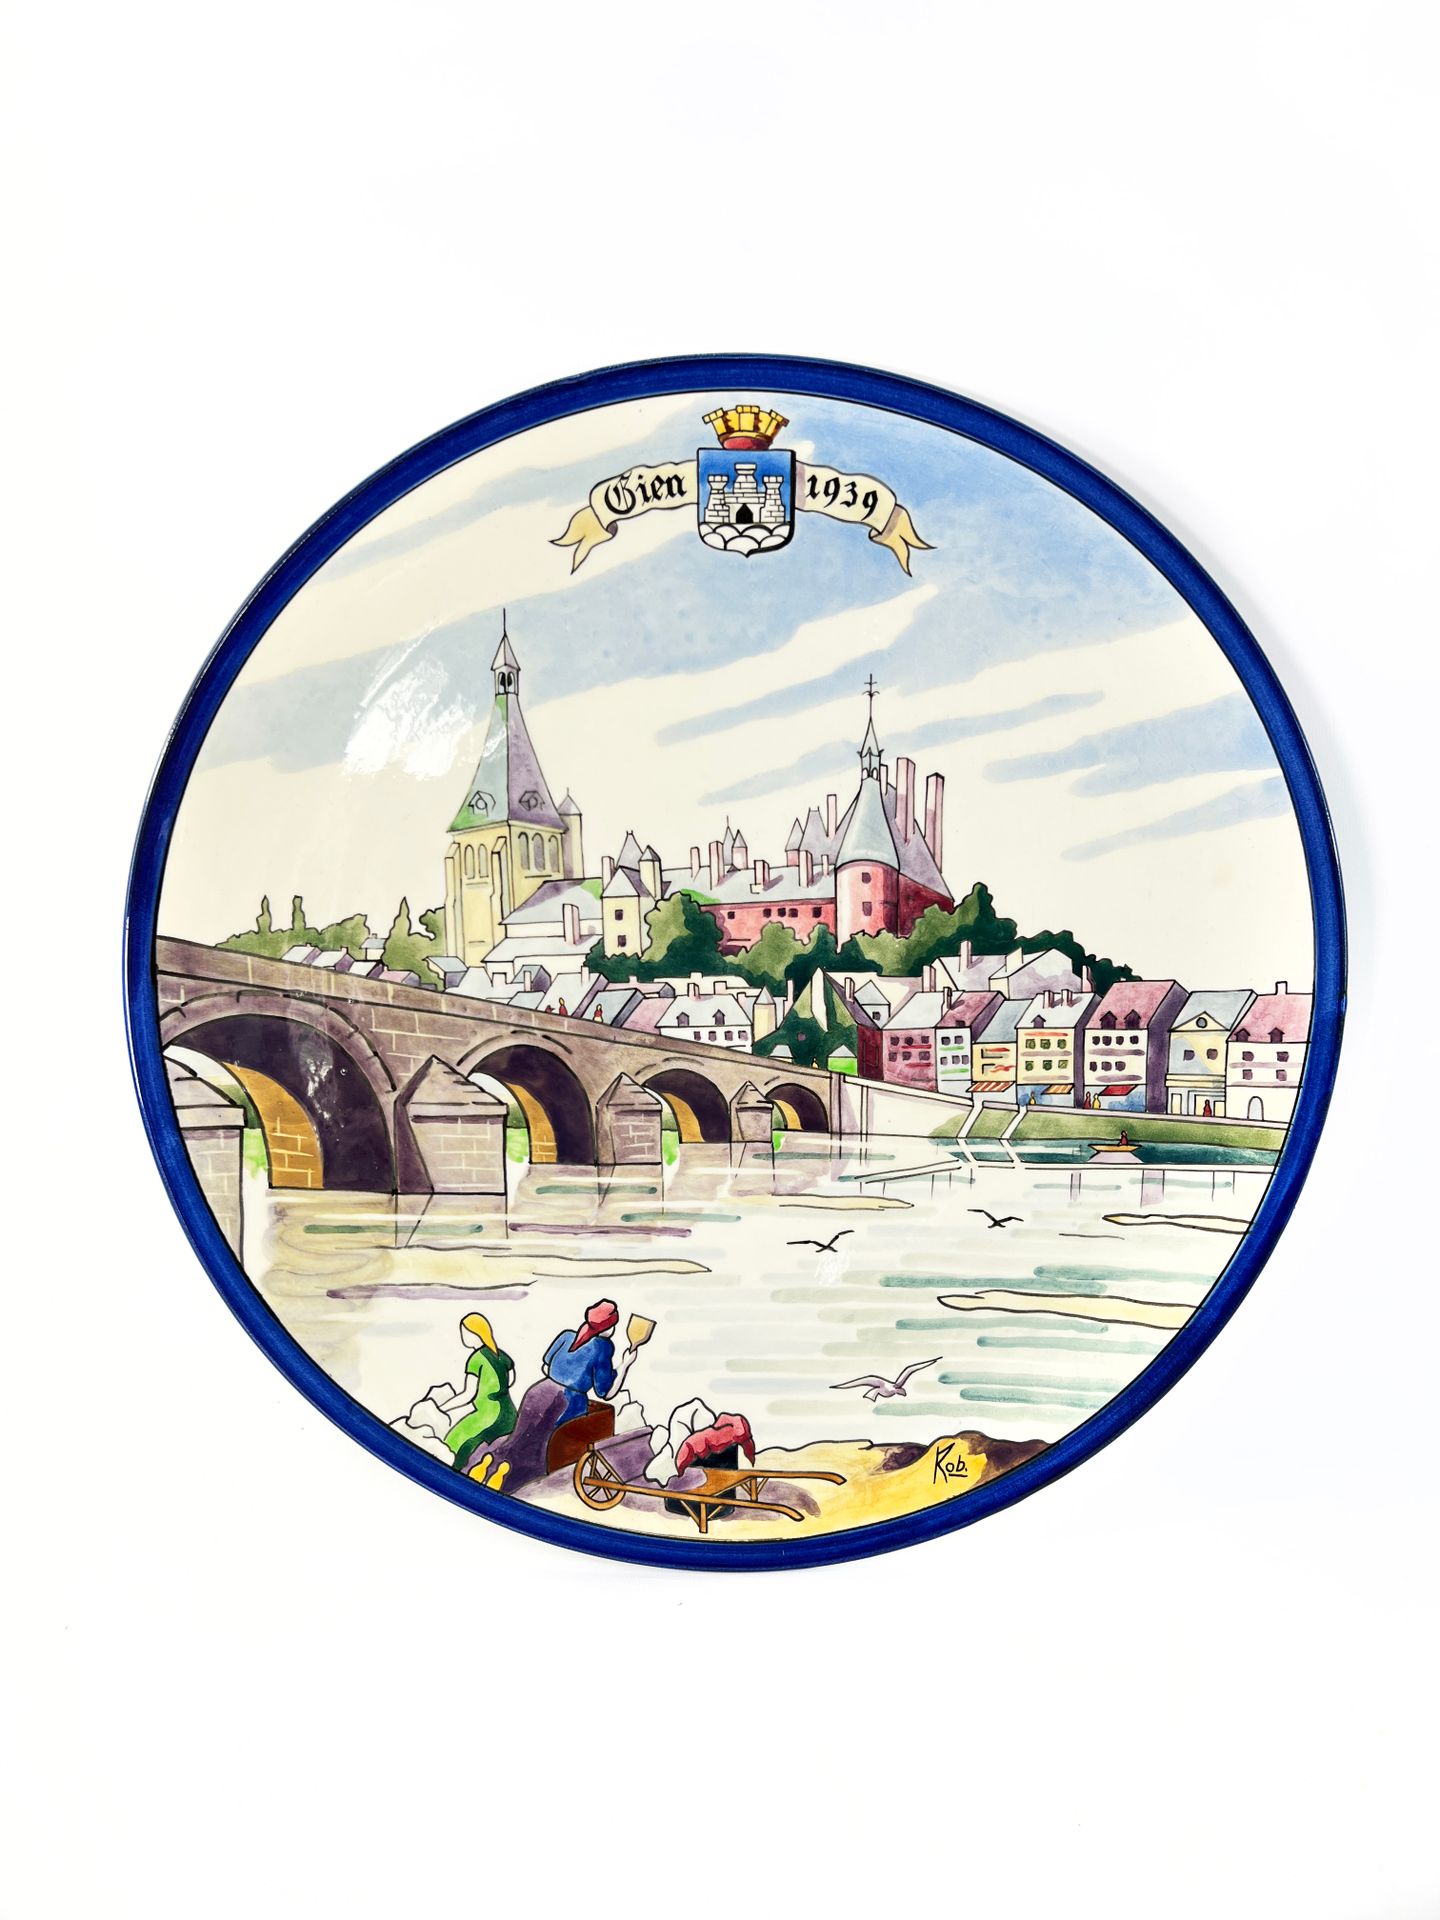 Null GIEN, 20th century

Wall display plate featuring the bridge of Gien.

Marke&hellip;